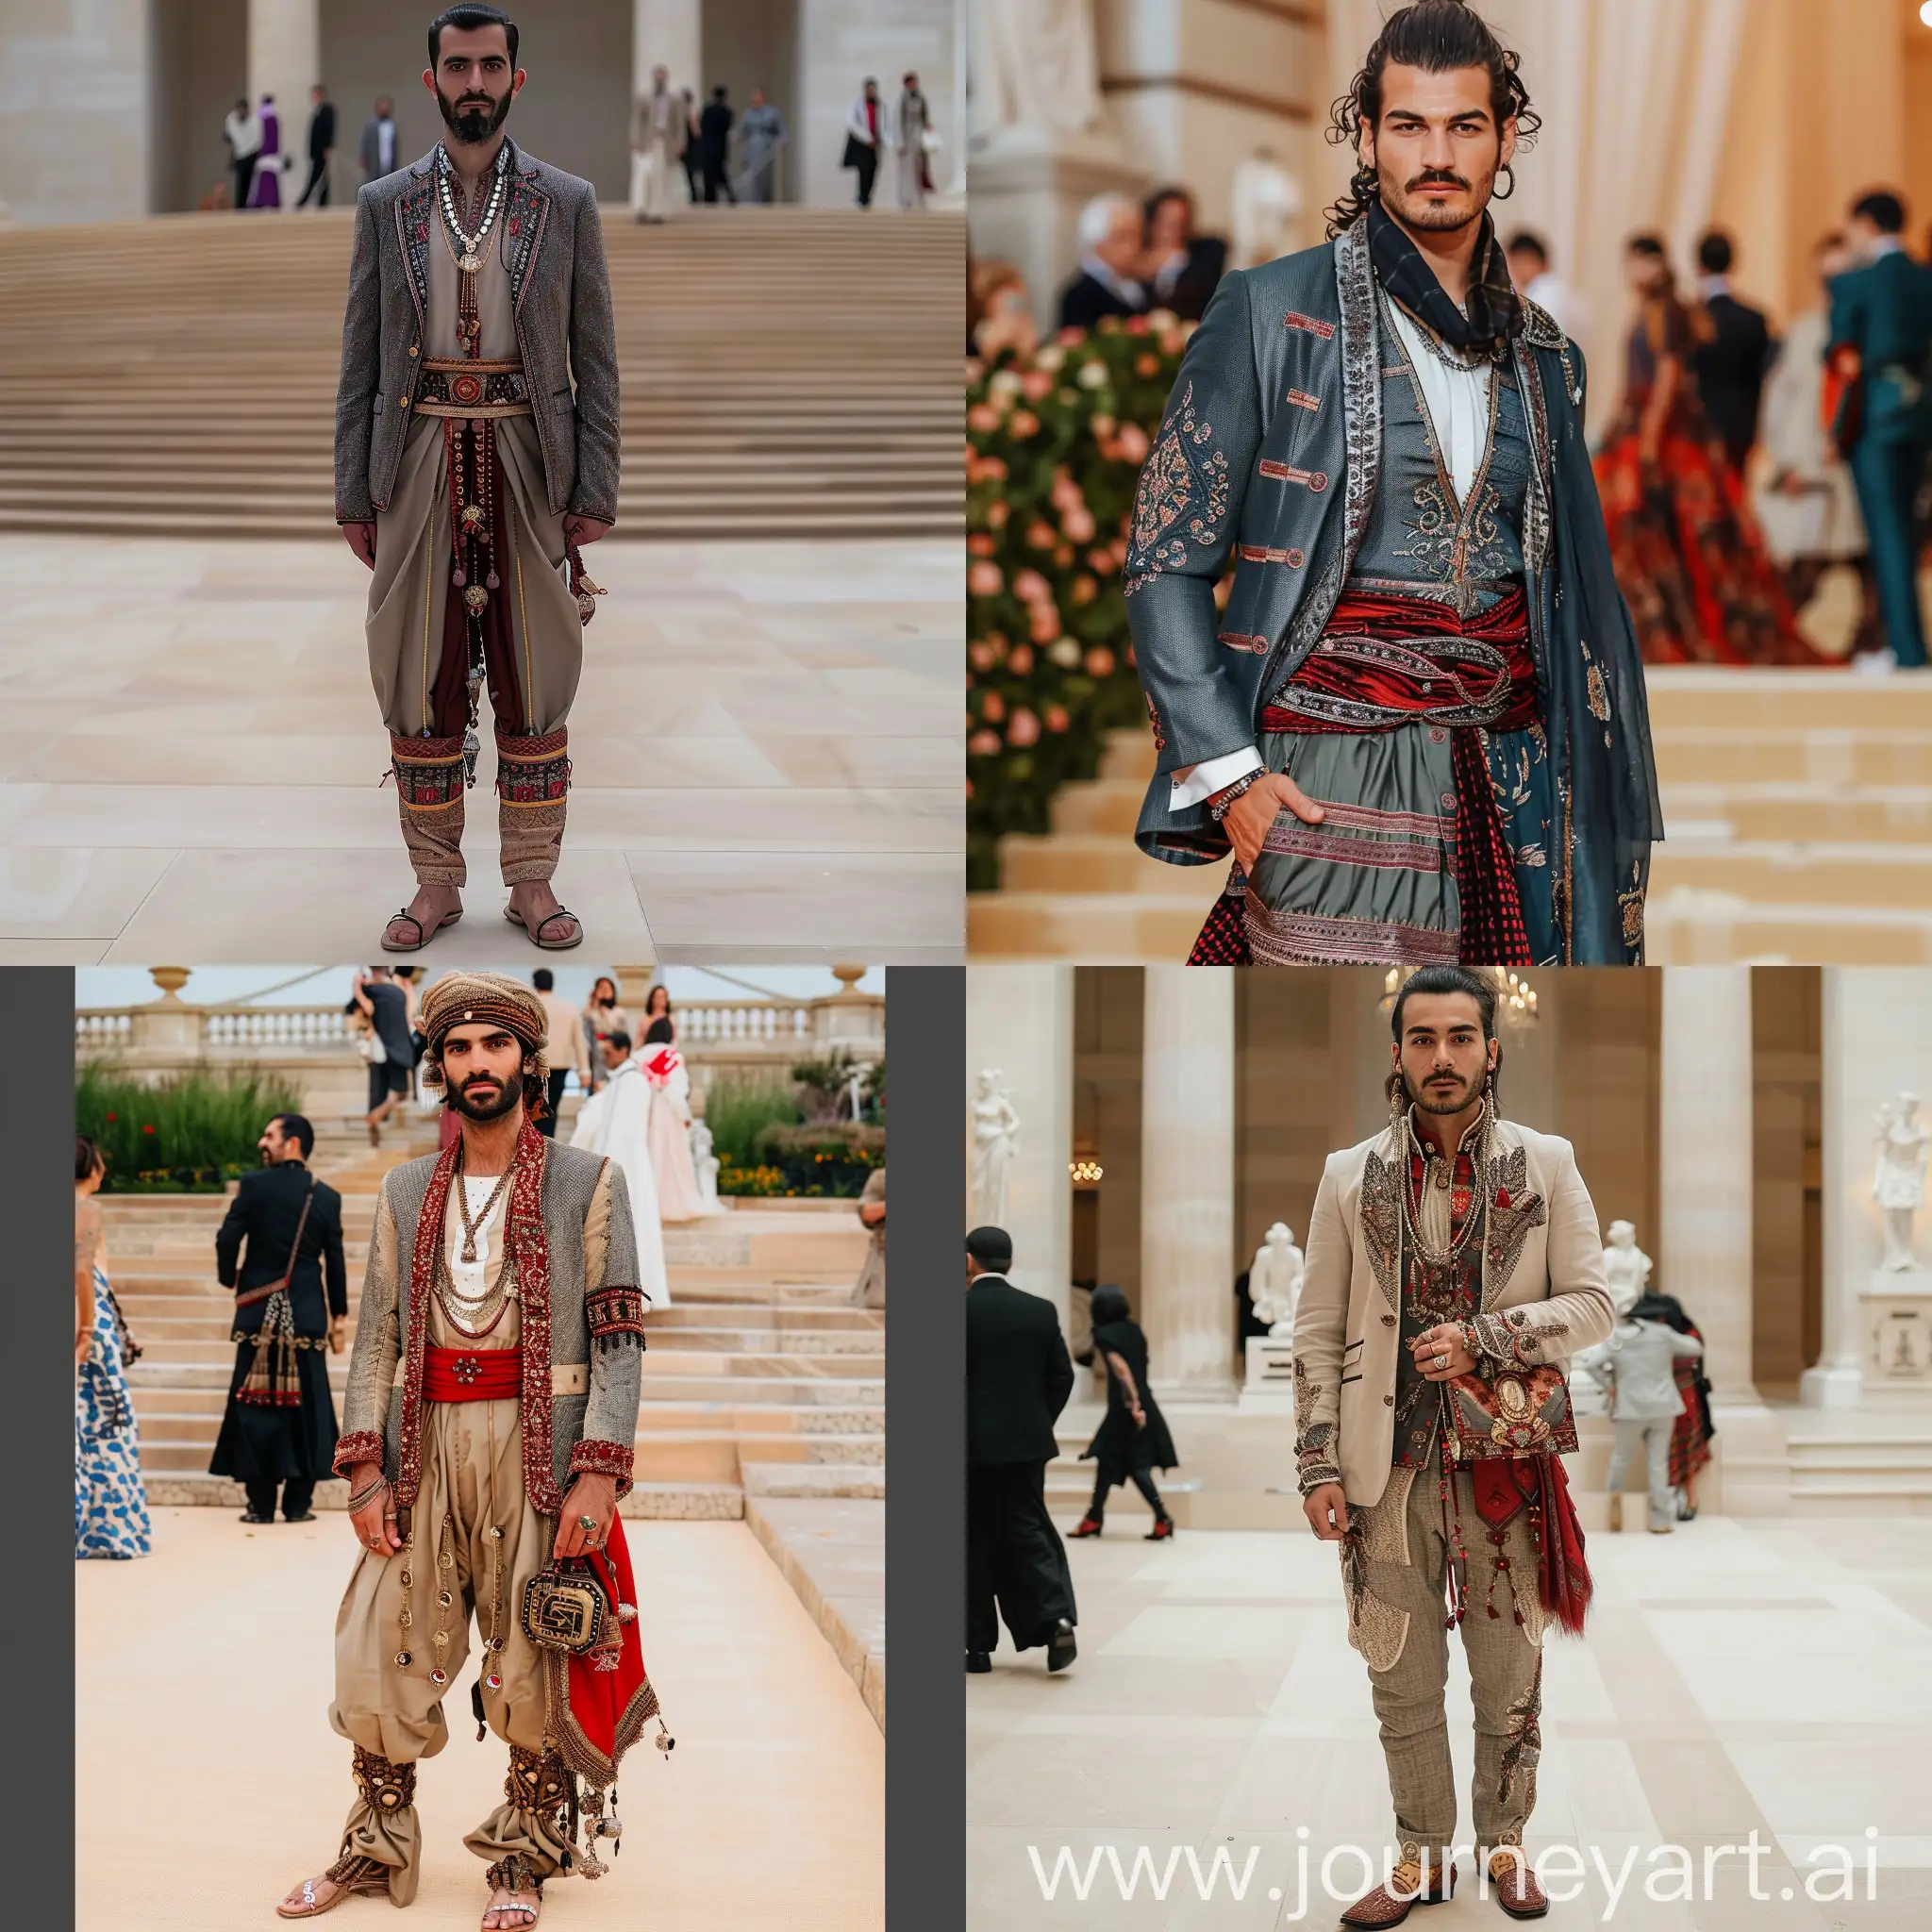 simple modernized turkish traditional outfit consisting a blazer, pair of pants, a shirt and a few accessories worn by a man in met gala
